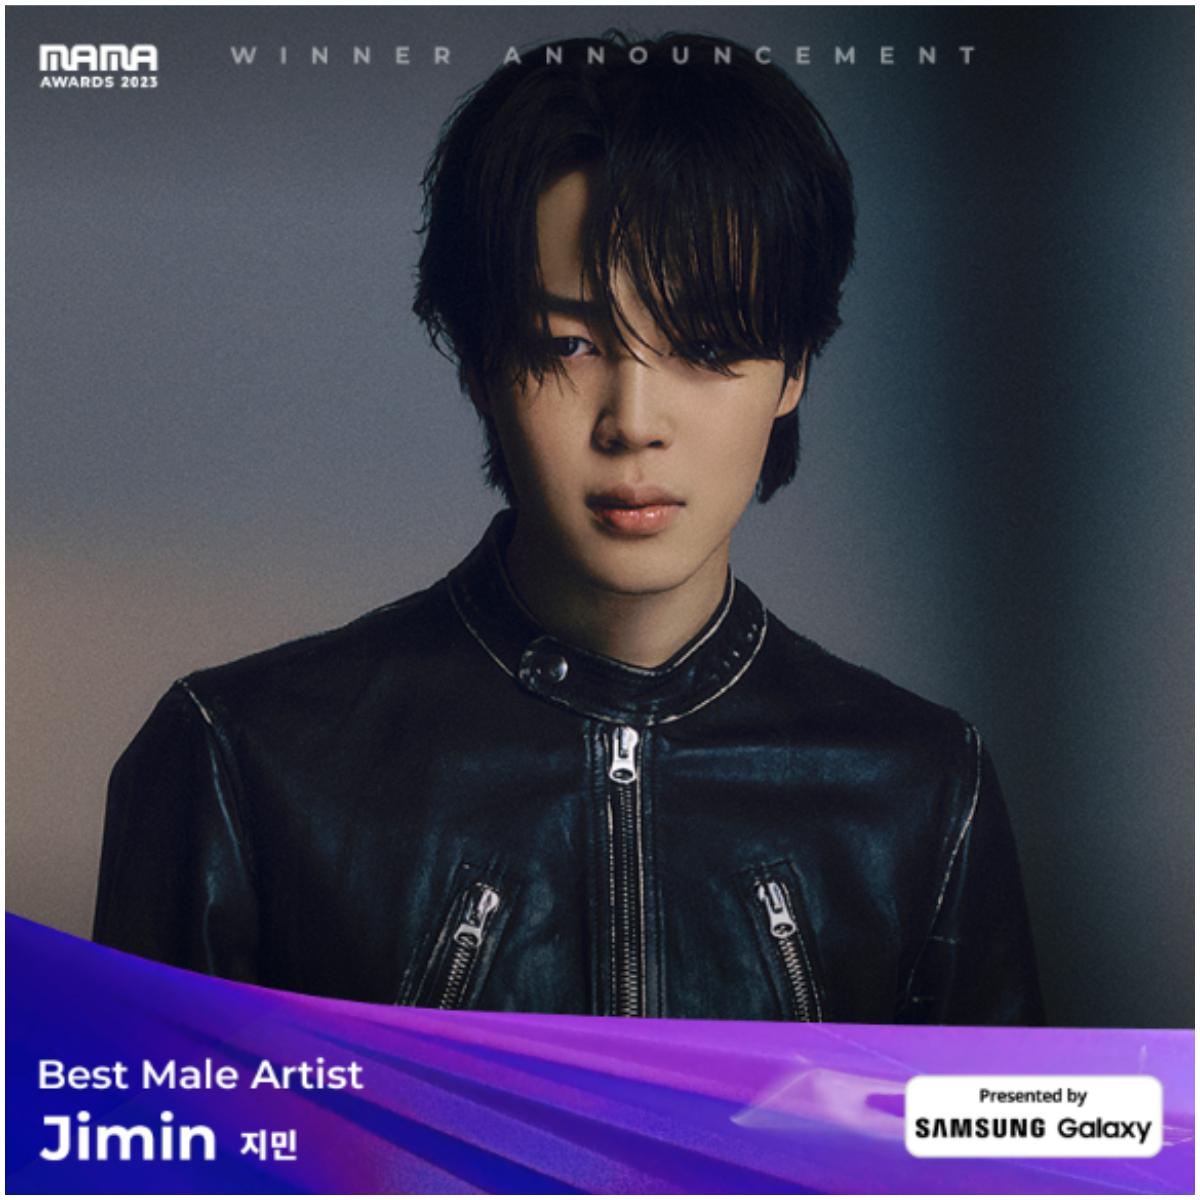 BTS member Jimin won one of the top solo gongs of the evening - Best Male Artist - for his solo album Face.